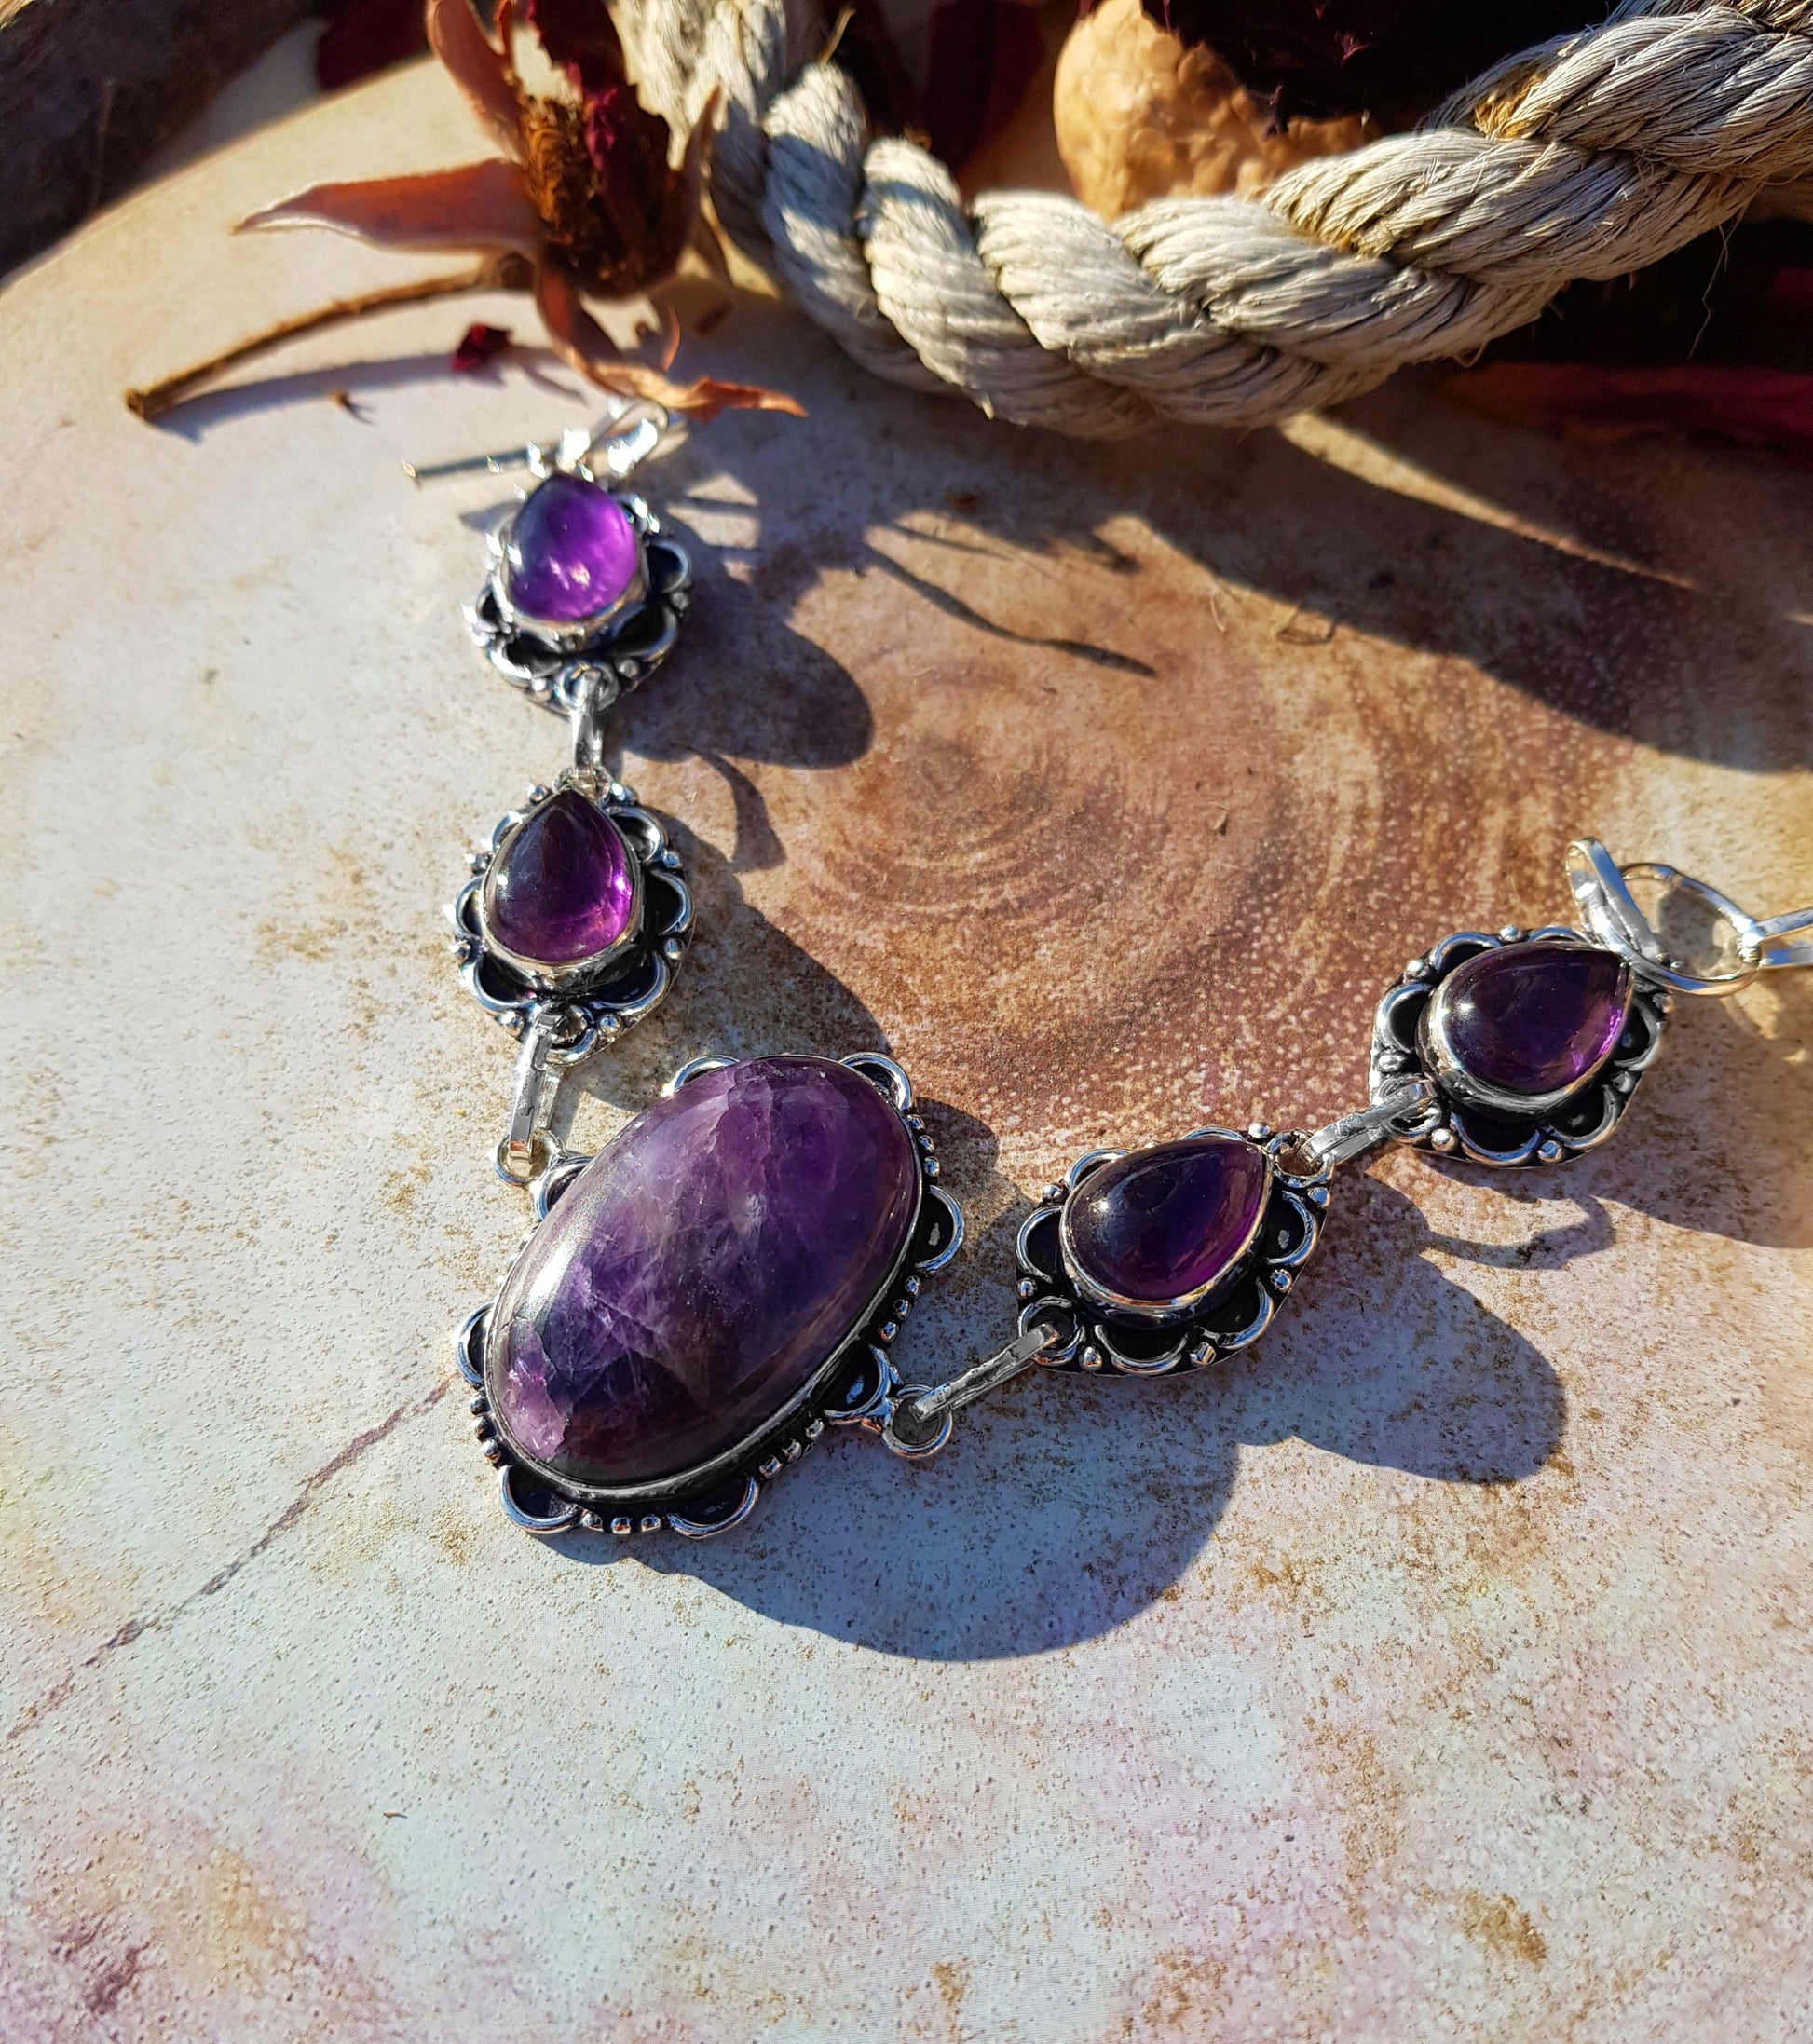 Amethyst And Charoite Necklace In Sterling Silver Statement Necklace Boho Crystal Necklace Unique Gift For Women